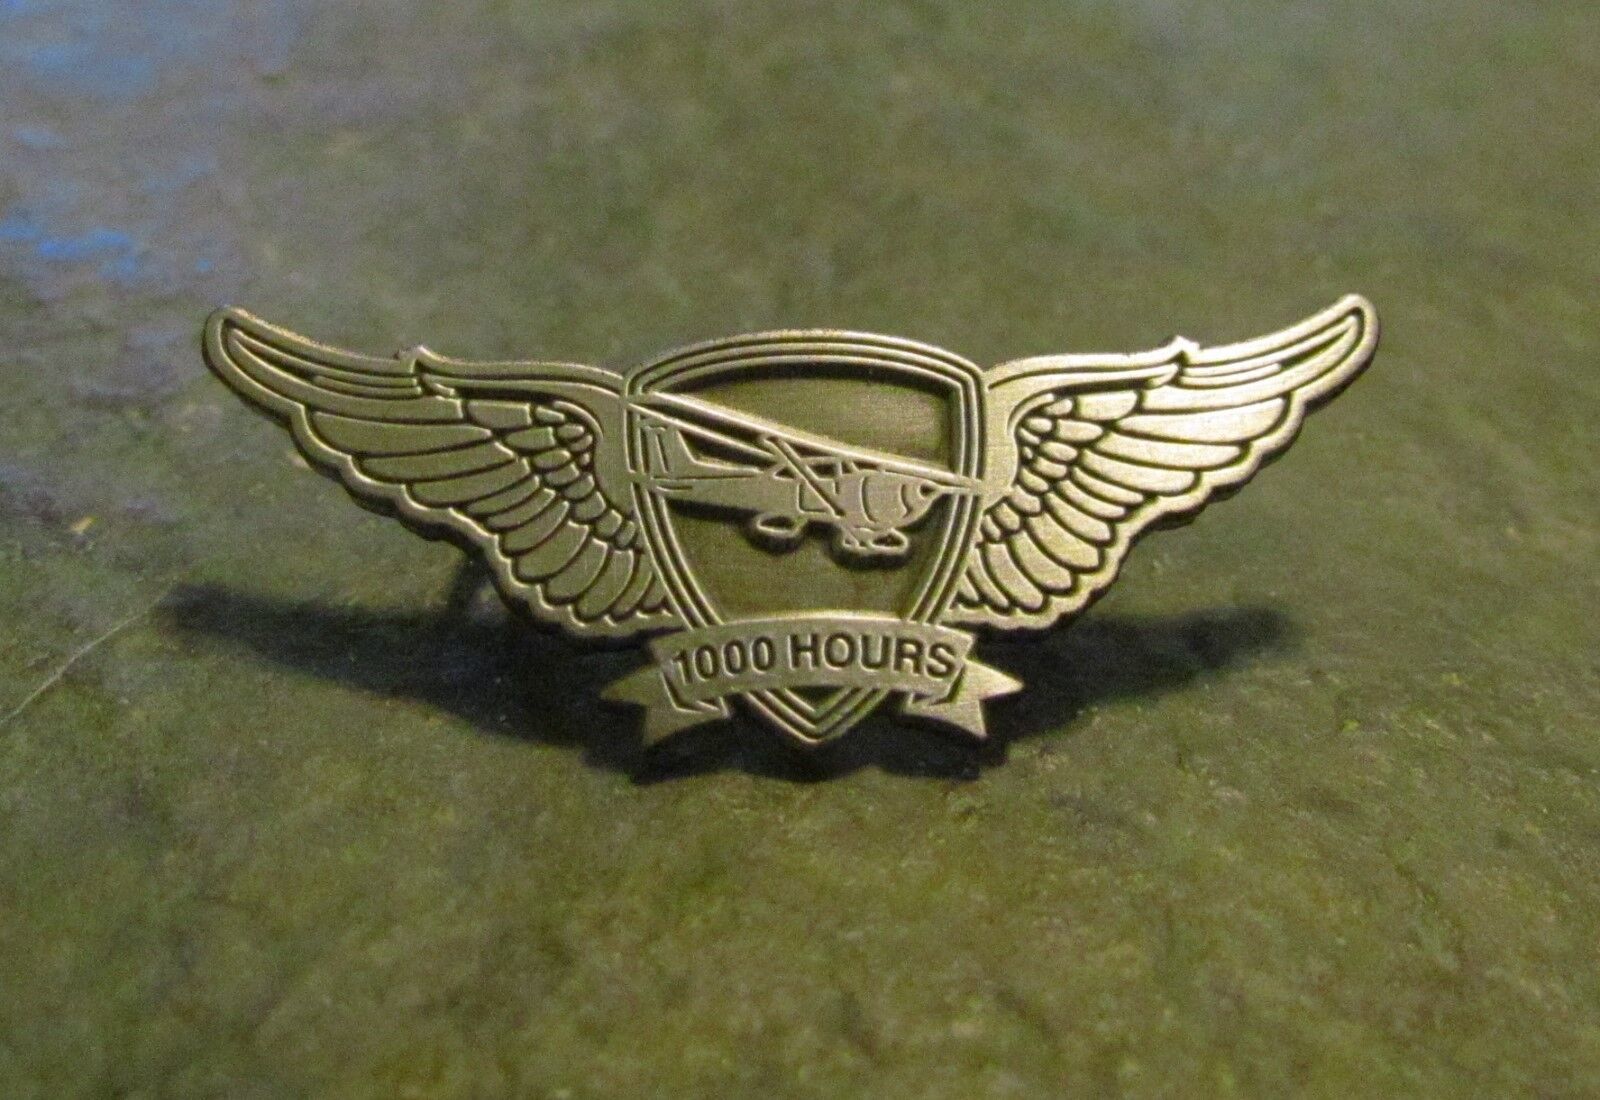 1000 hour pin. Cessna/High Wing aircraft. Die cast pin. General Aviation